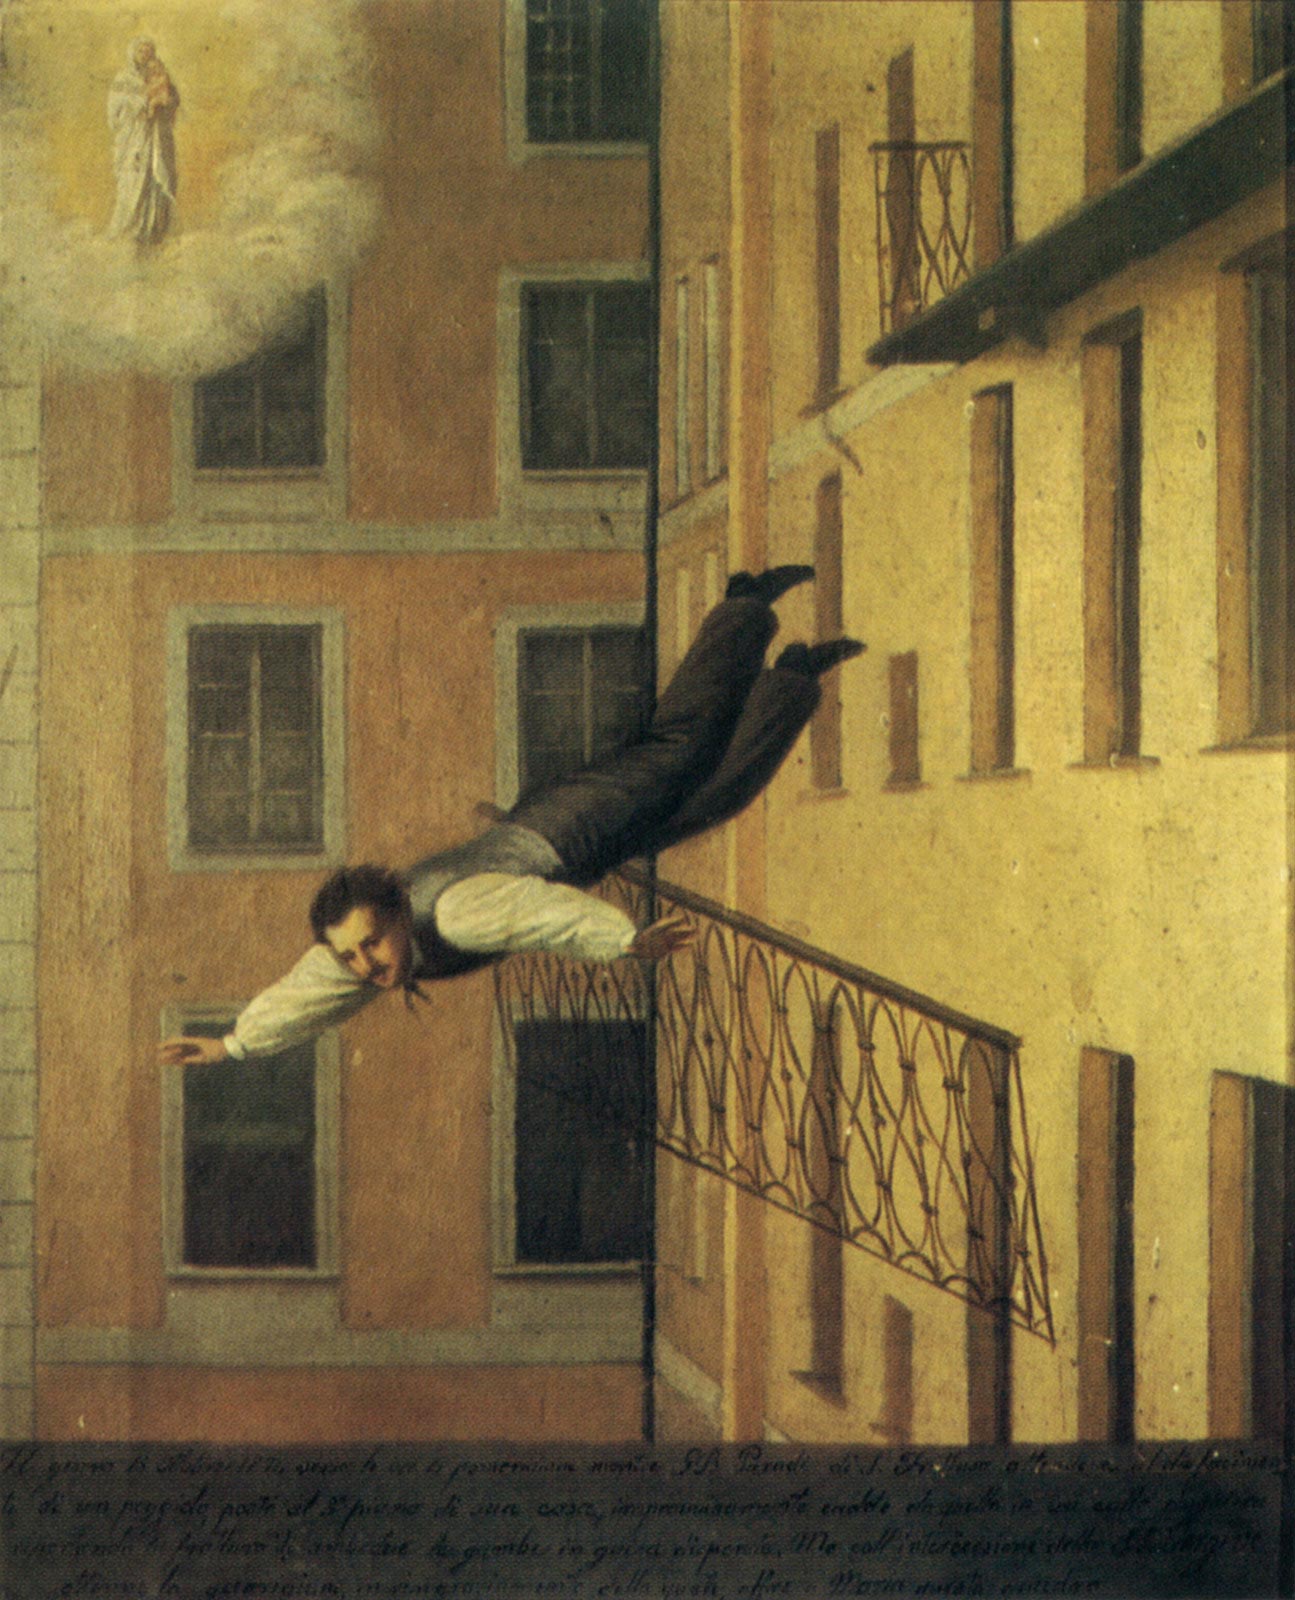 ex-voto-06-man-falls-from-balcony-another-version